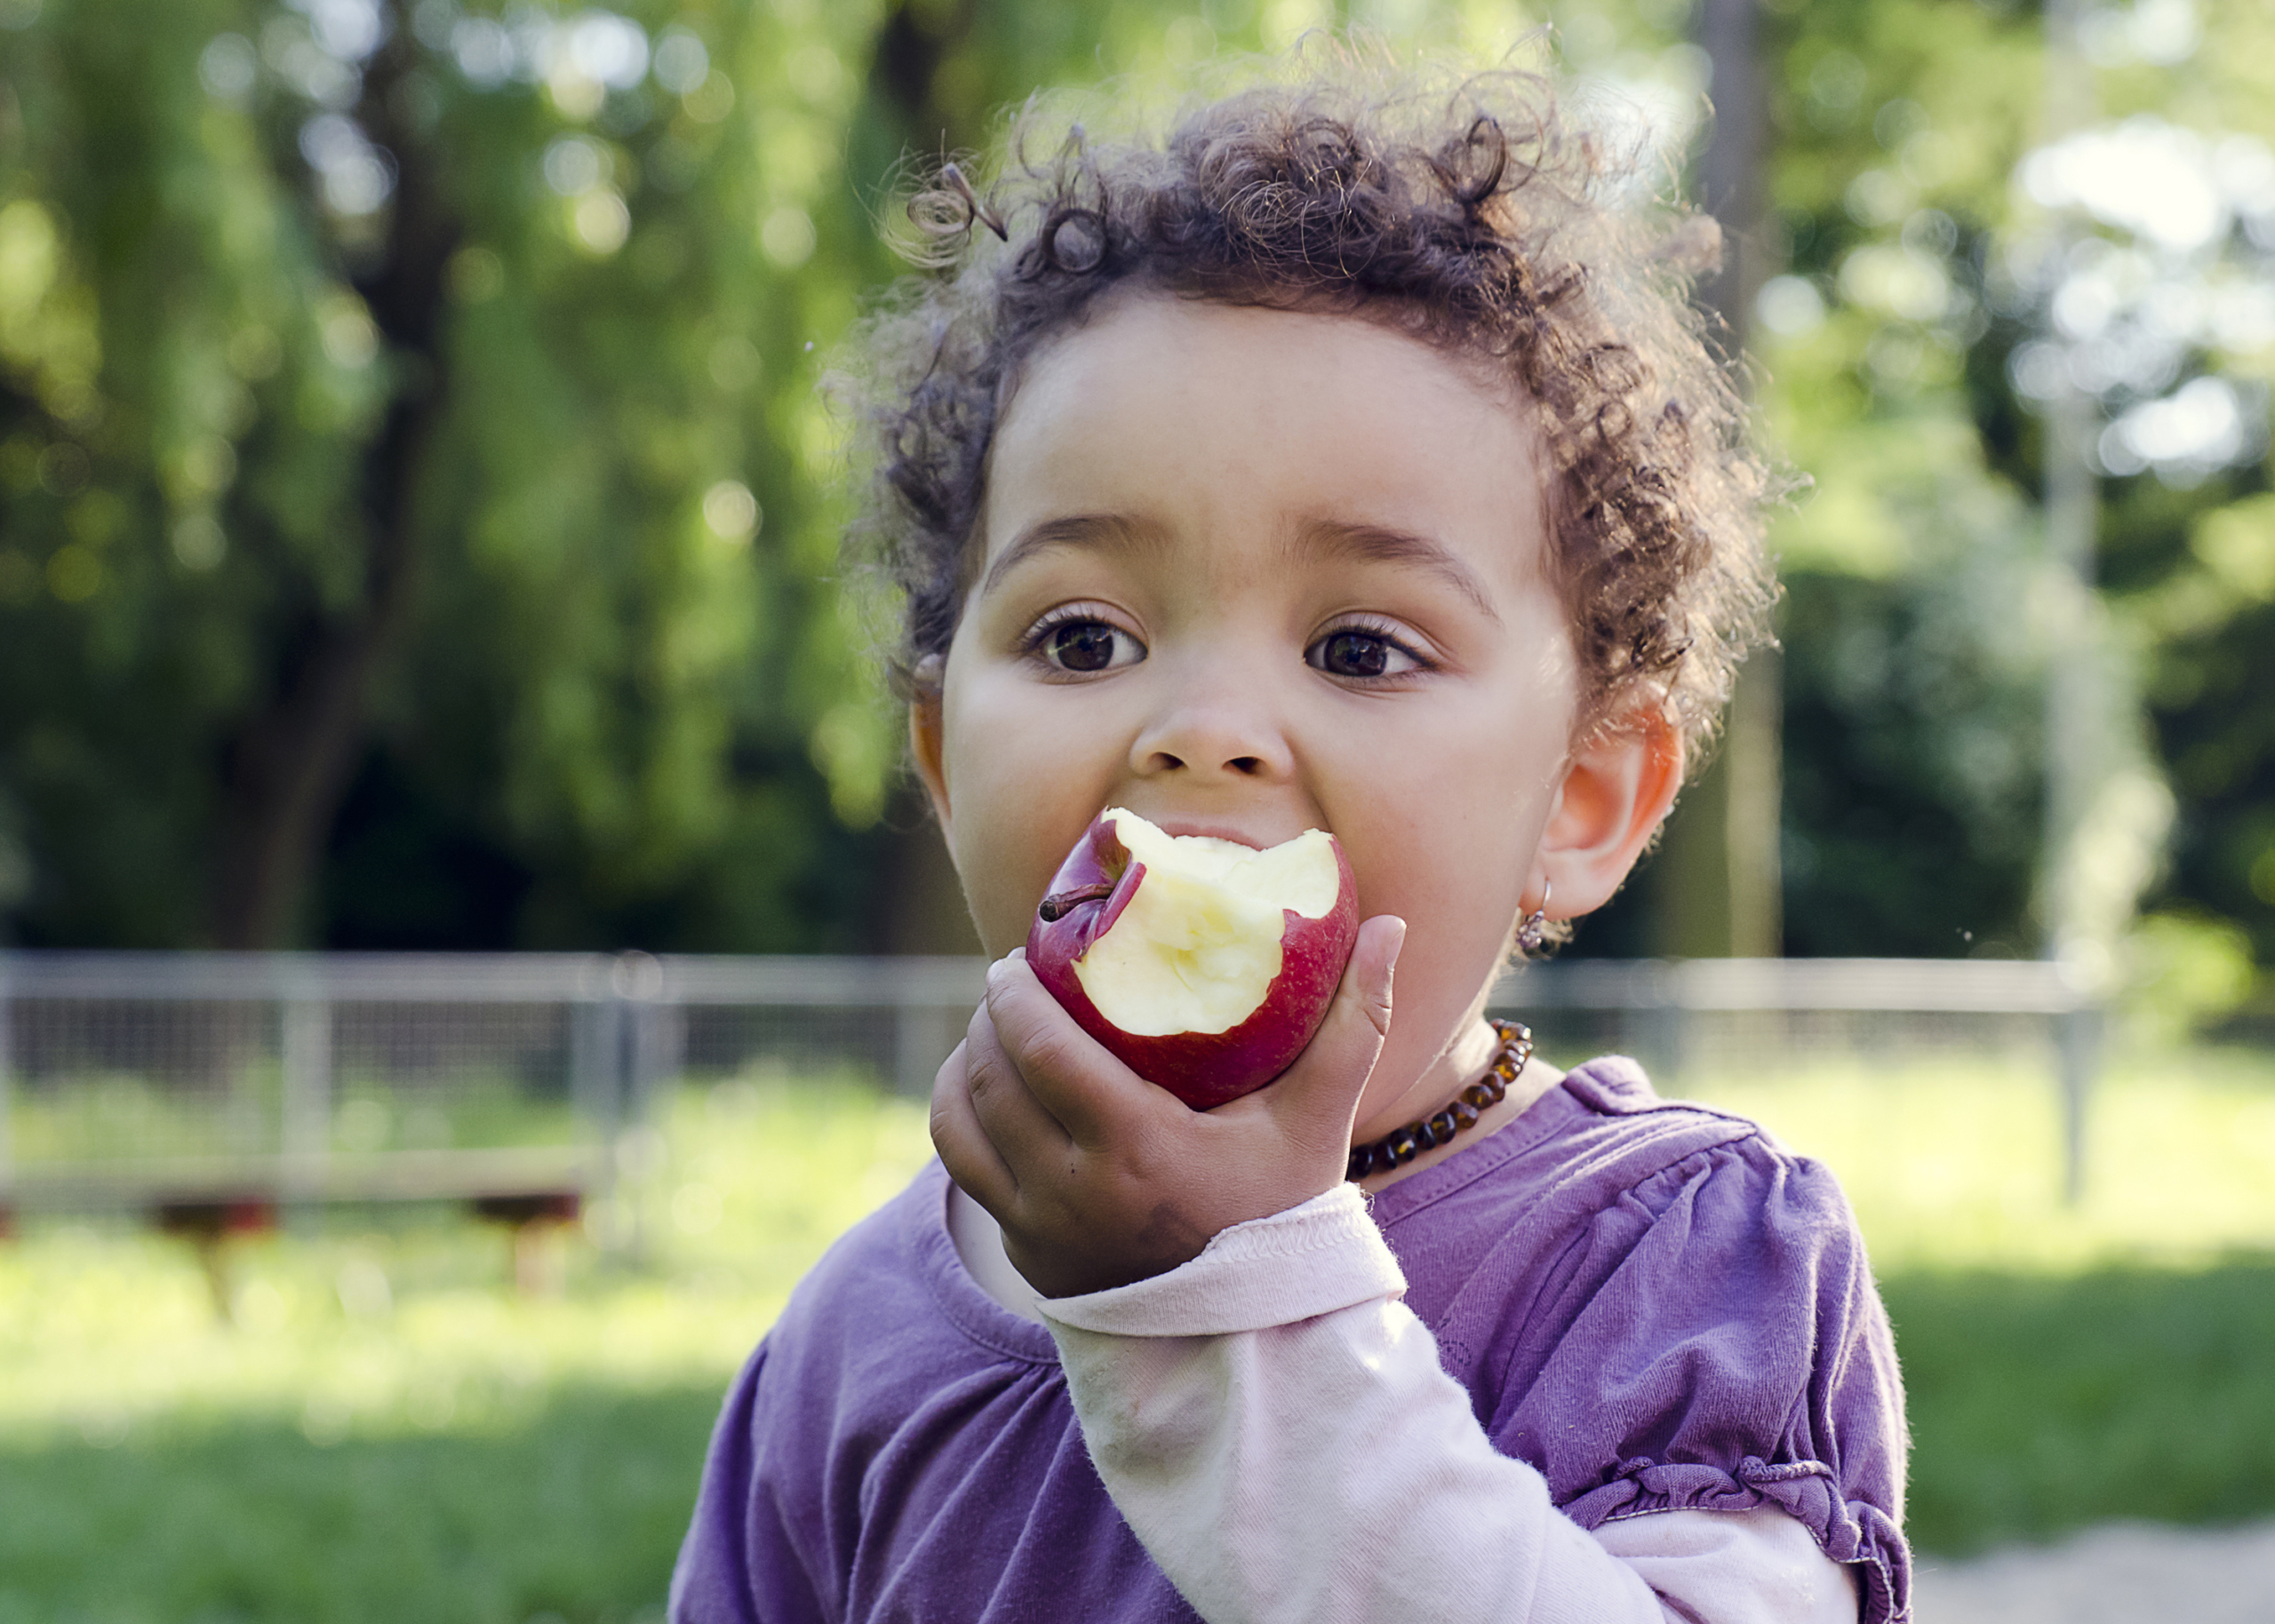 Child child eating an apple in a park in nature during Global Child Nutrition Month